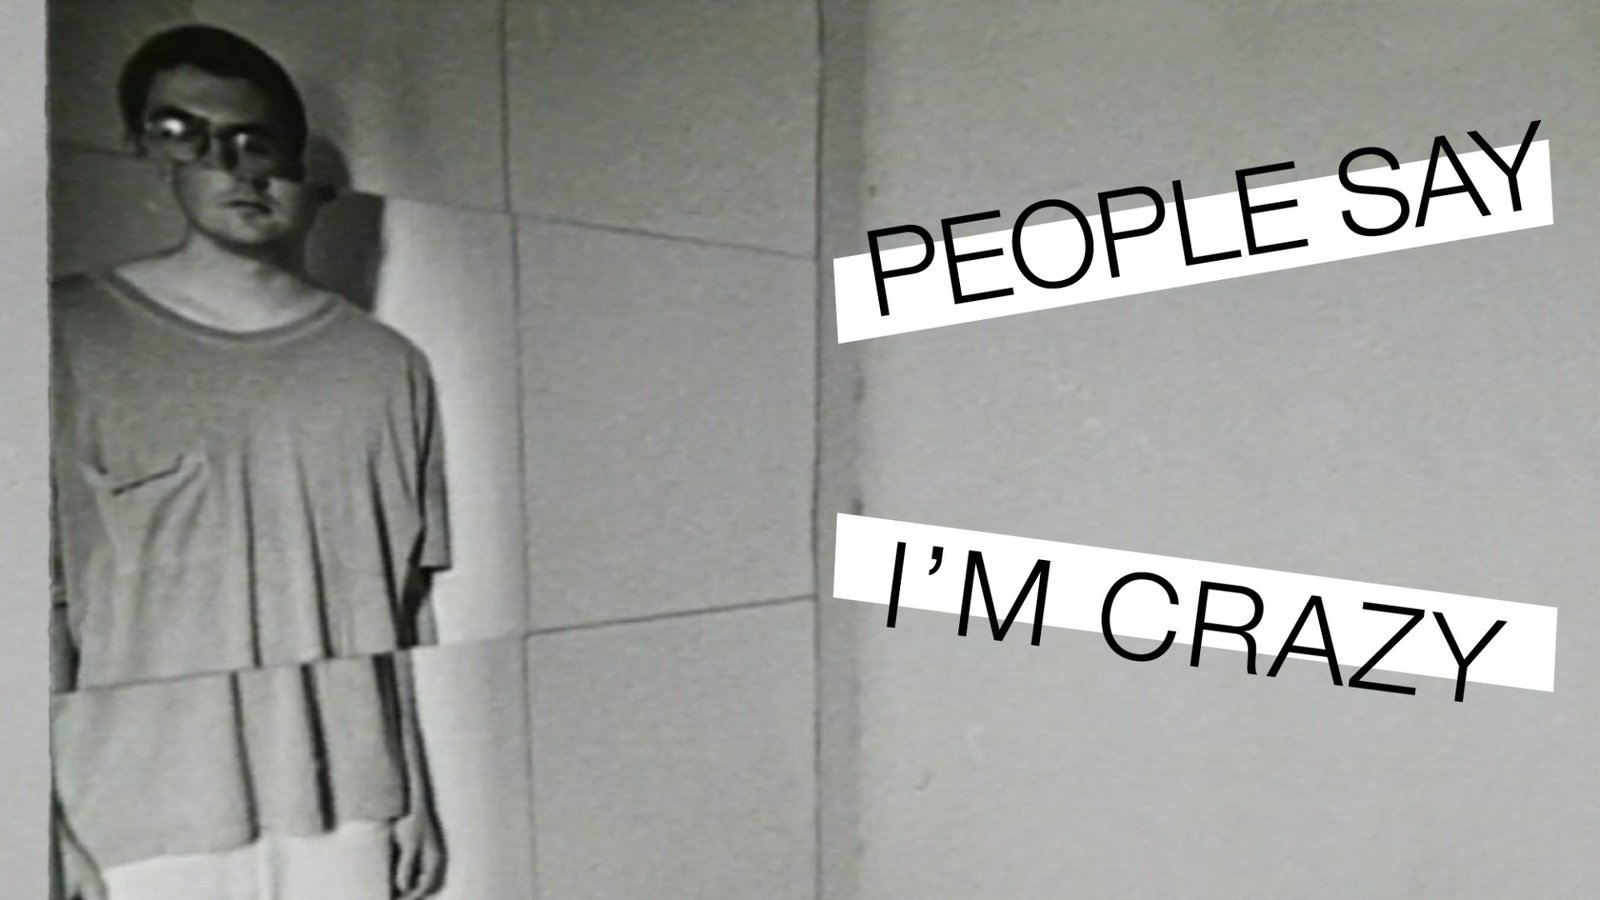 People Say I'm Crazy - Schizophrenia Viewed from the Inside Out